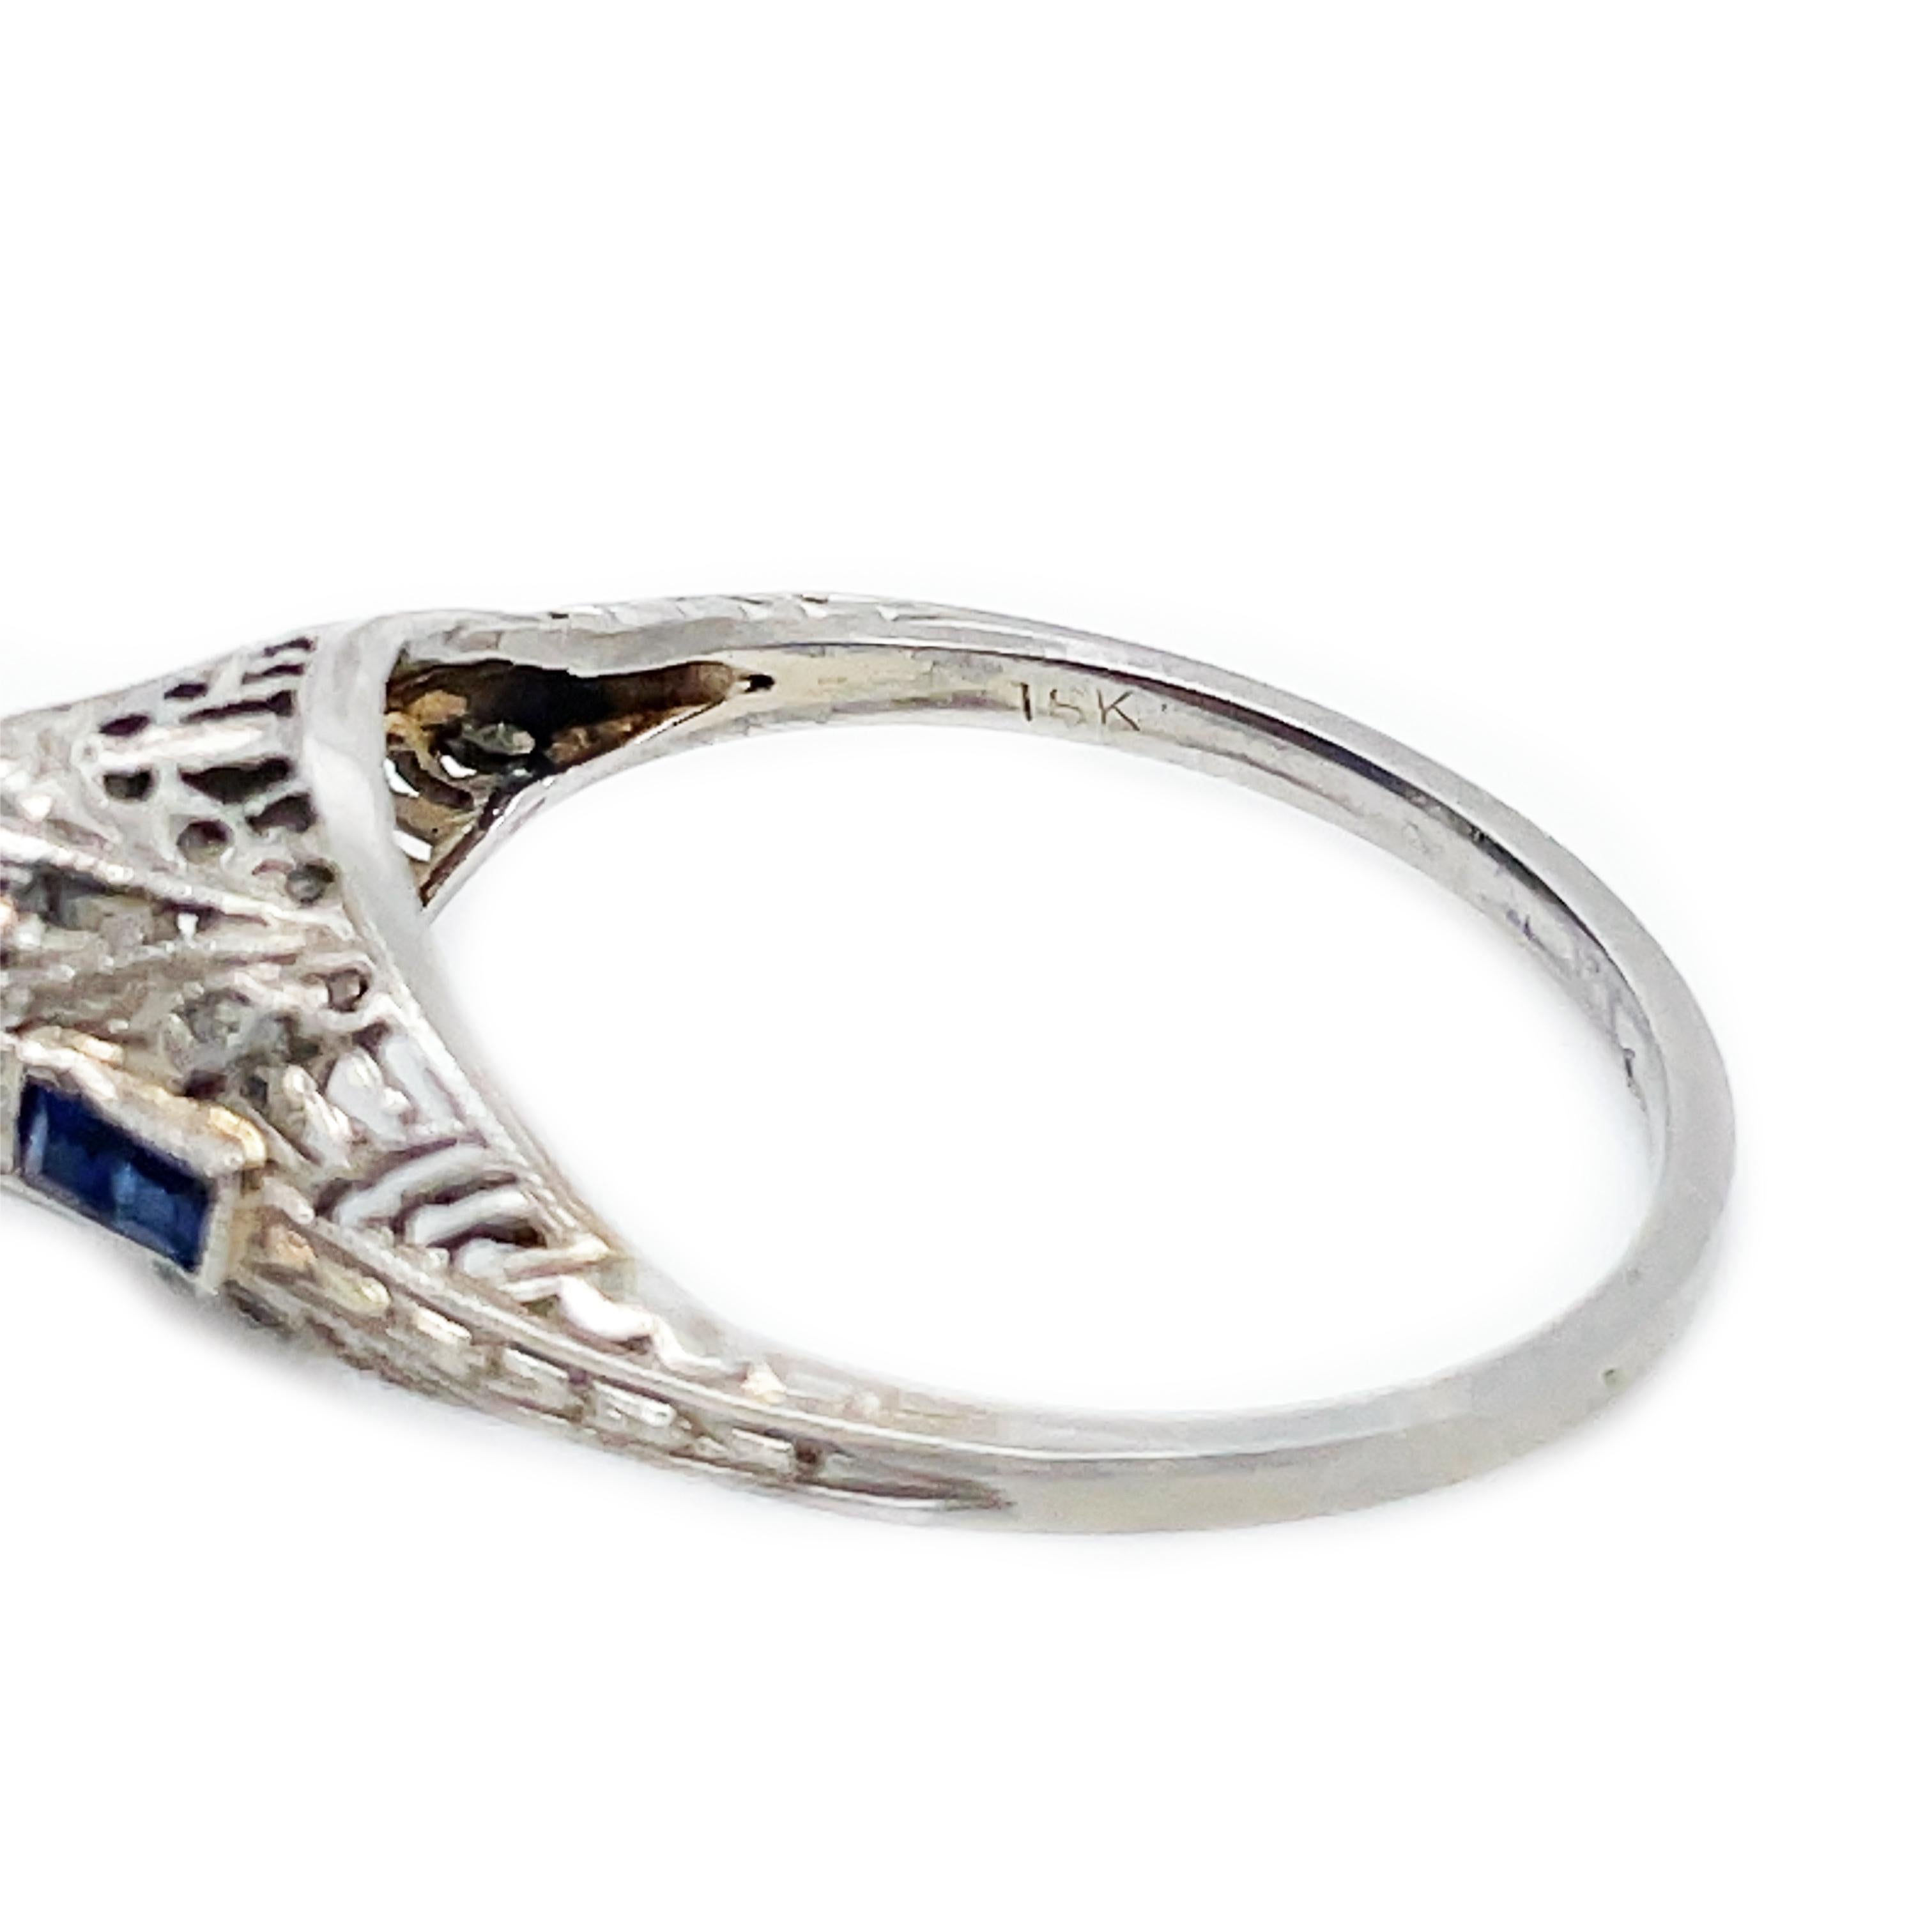 1915 Art Deco Diamond and Sapphire White Gold Filigree Ring with GIA Cert. 2